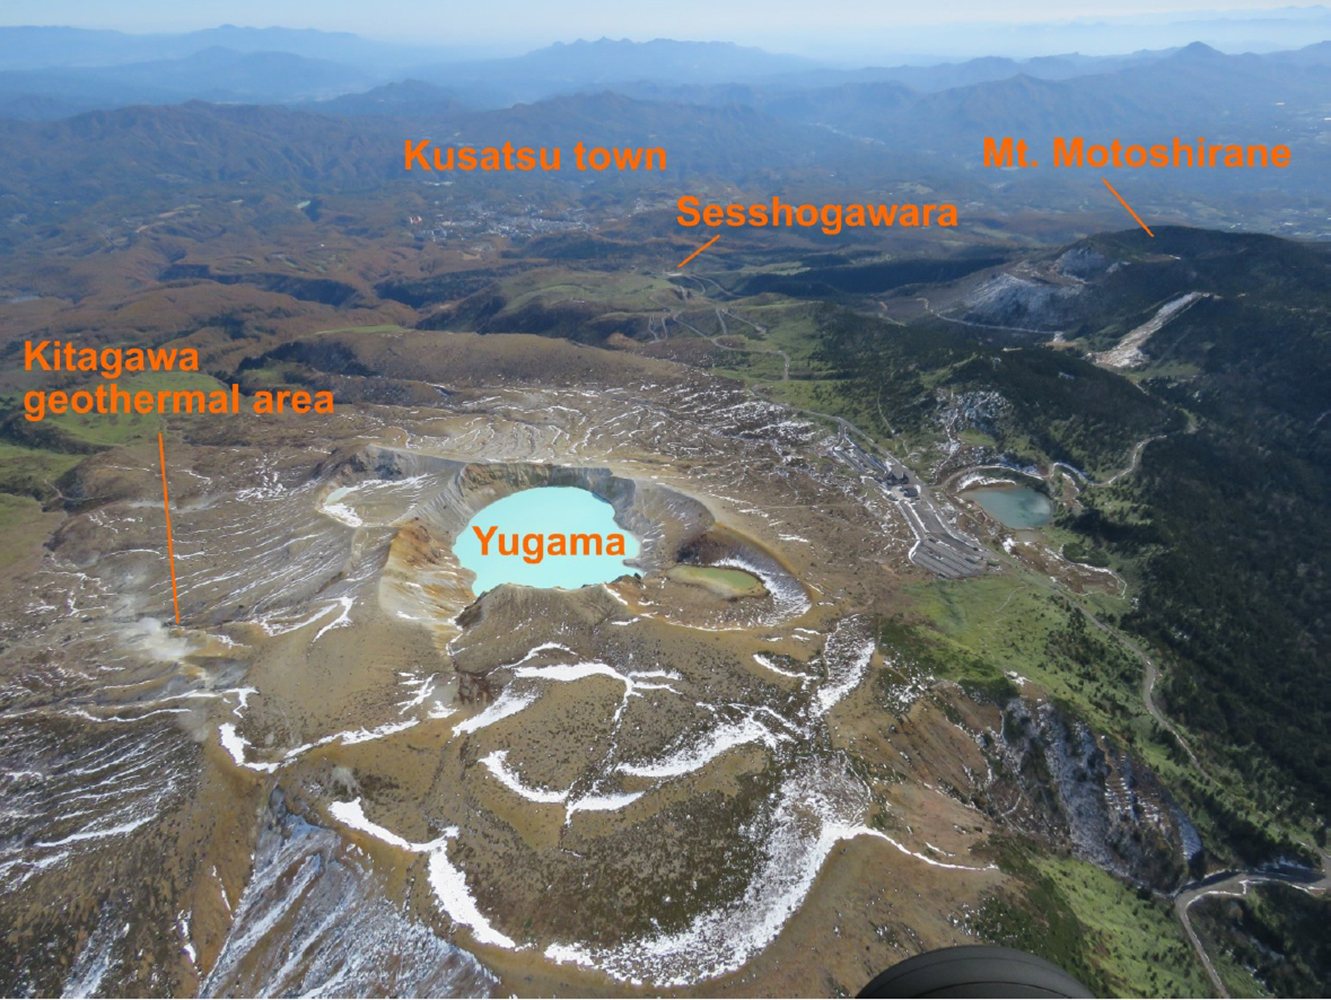 Aerial photo of the Kuaatsu-shirane volcano with some key locations, such as Kusatsu town, marked.